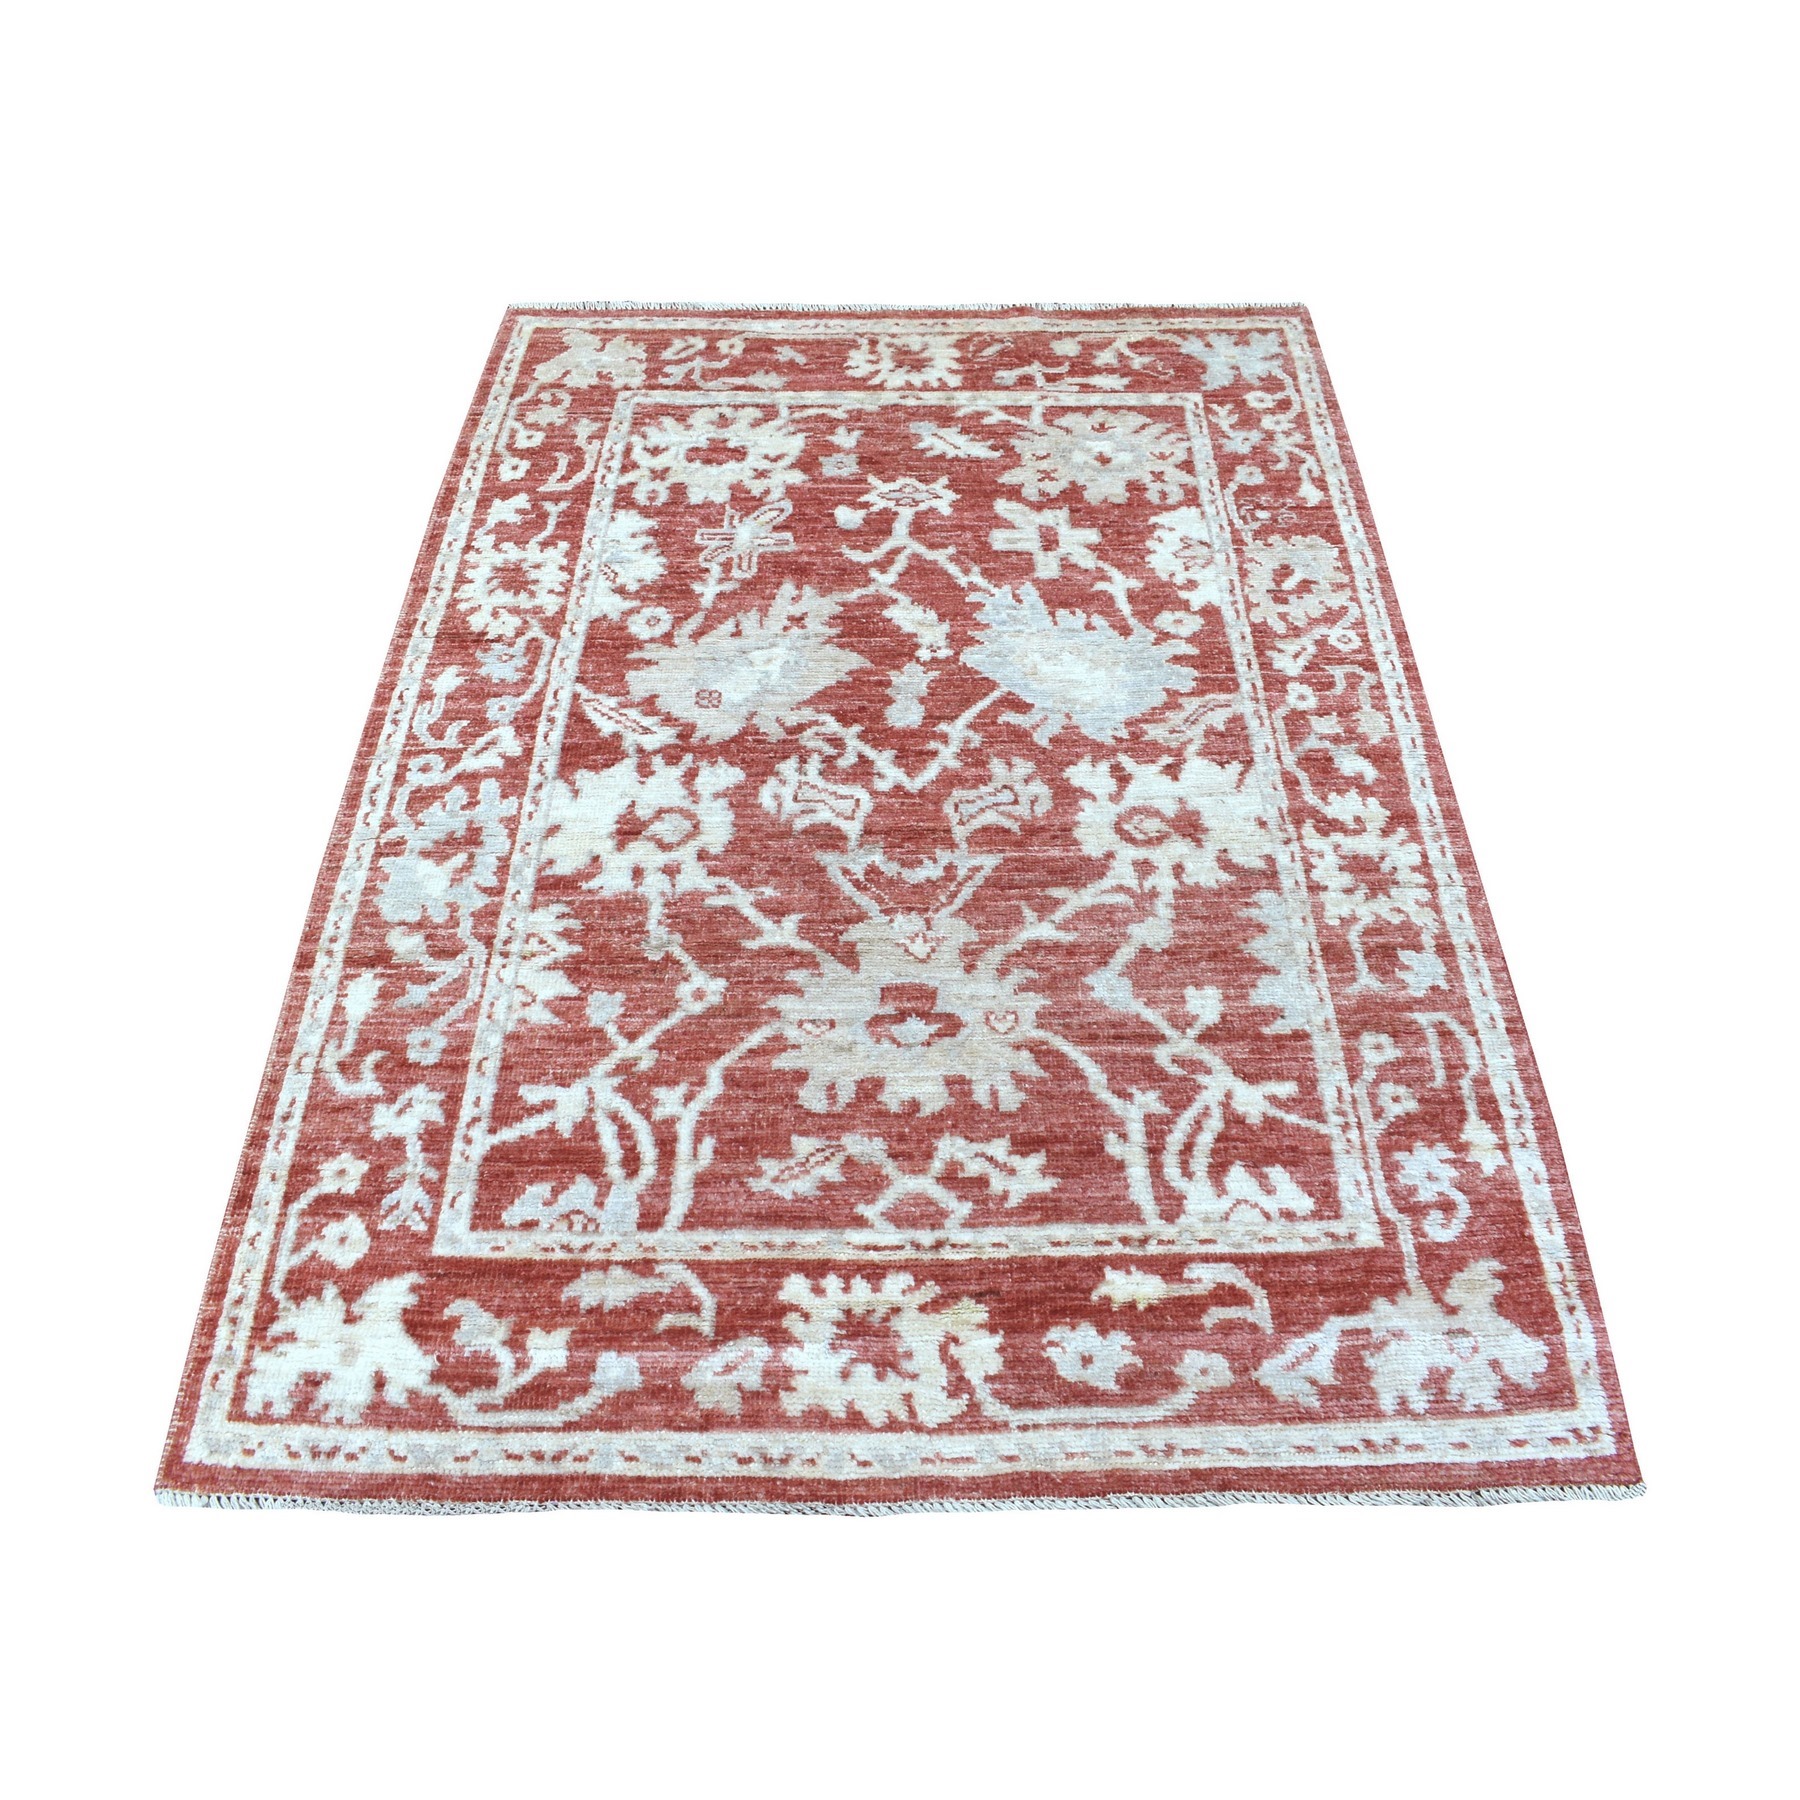 Agra And Turkish Collection Hand Knotted Red Rug No: 1135162